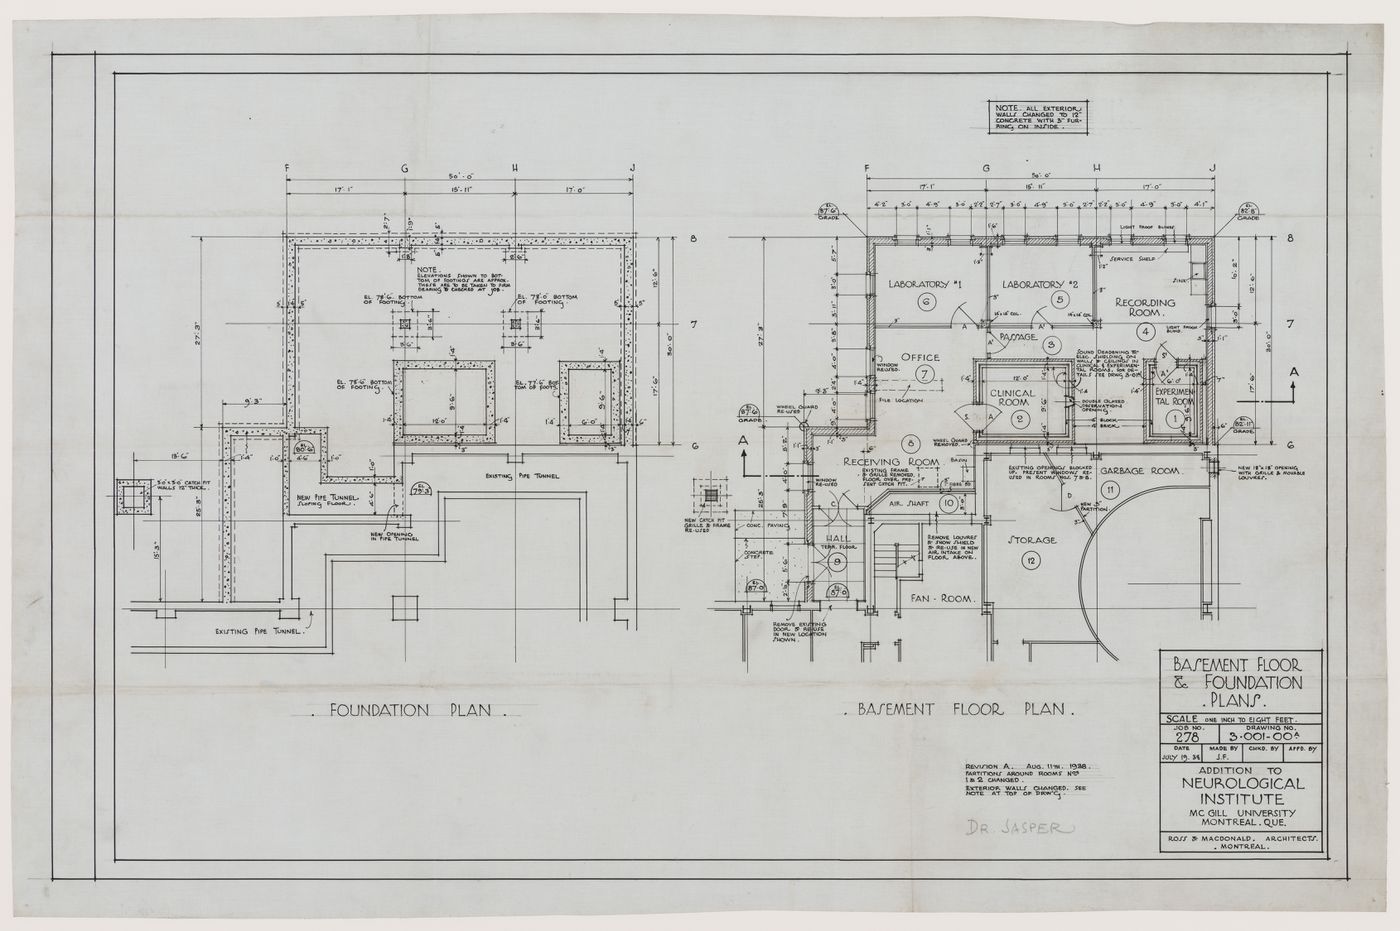 Basement floor and foundation plans for addition to Neurological Institute, McGill University, Montreal, Québec